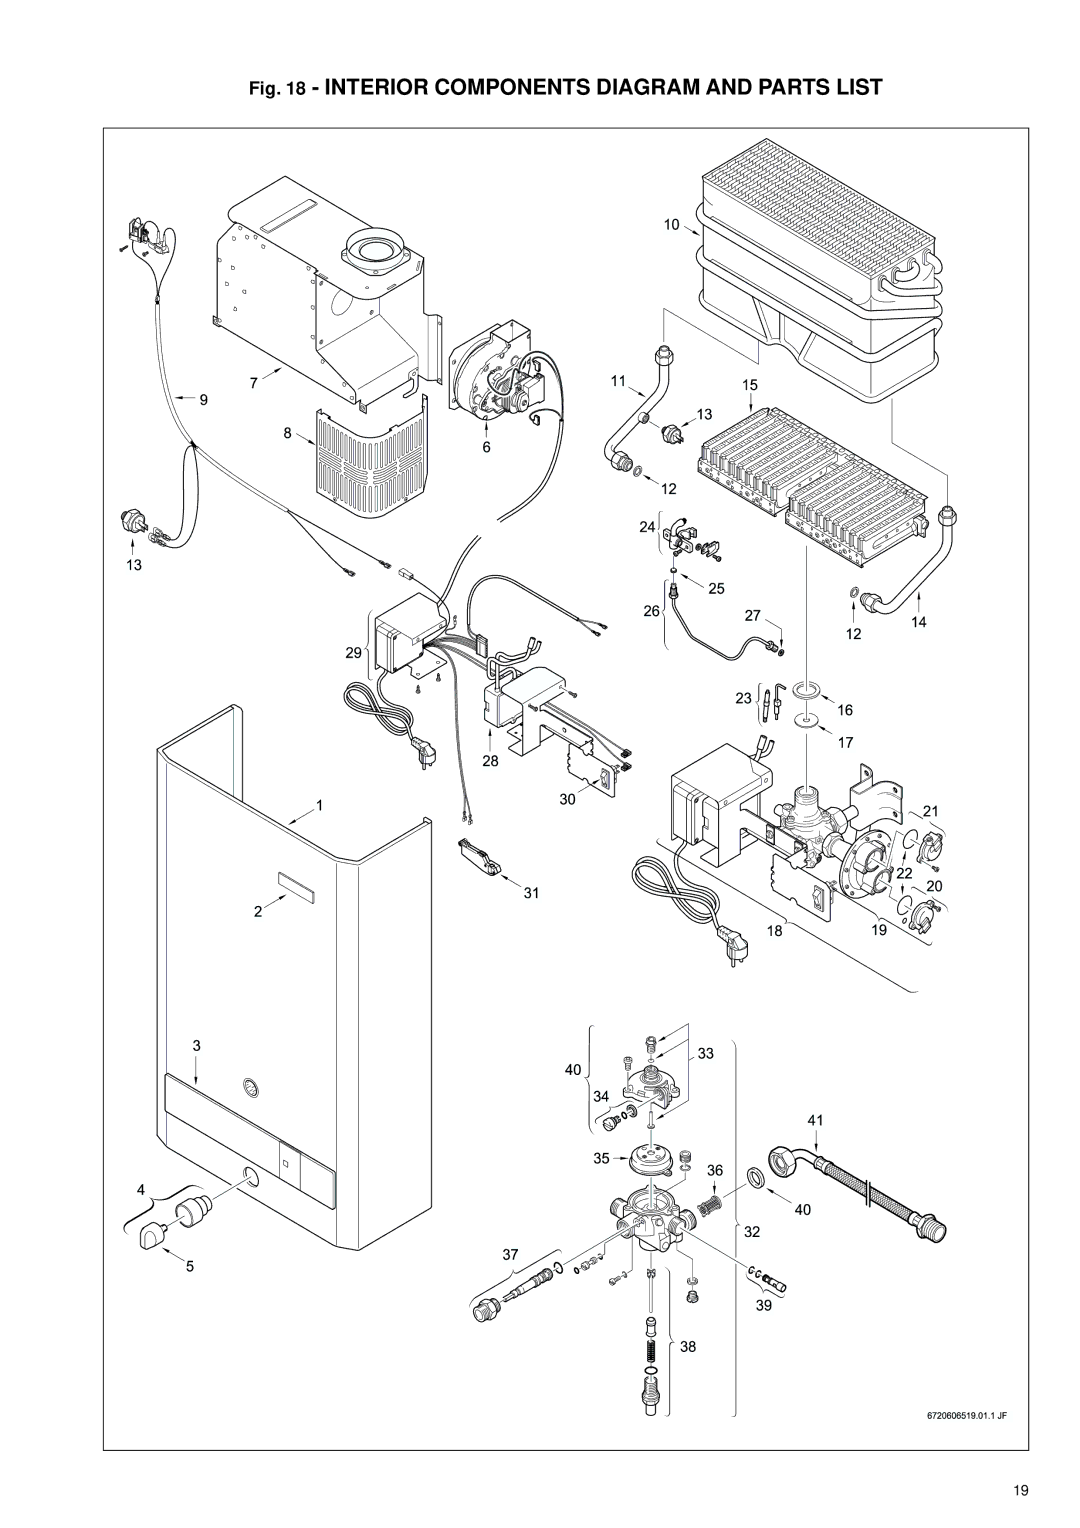 Bosch Appliances 125FX NG, 125FX LP specifications Interior Components Diagram and Parts List 